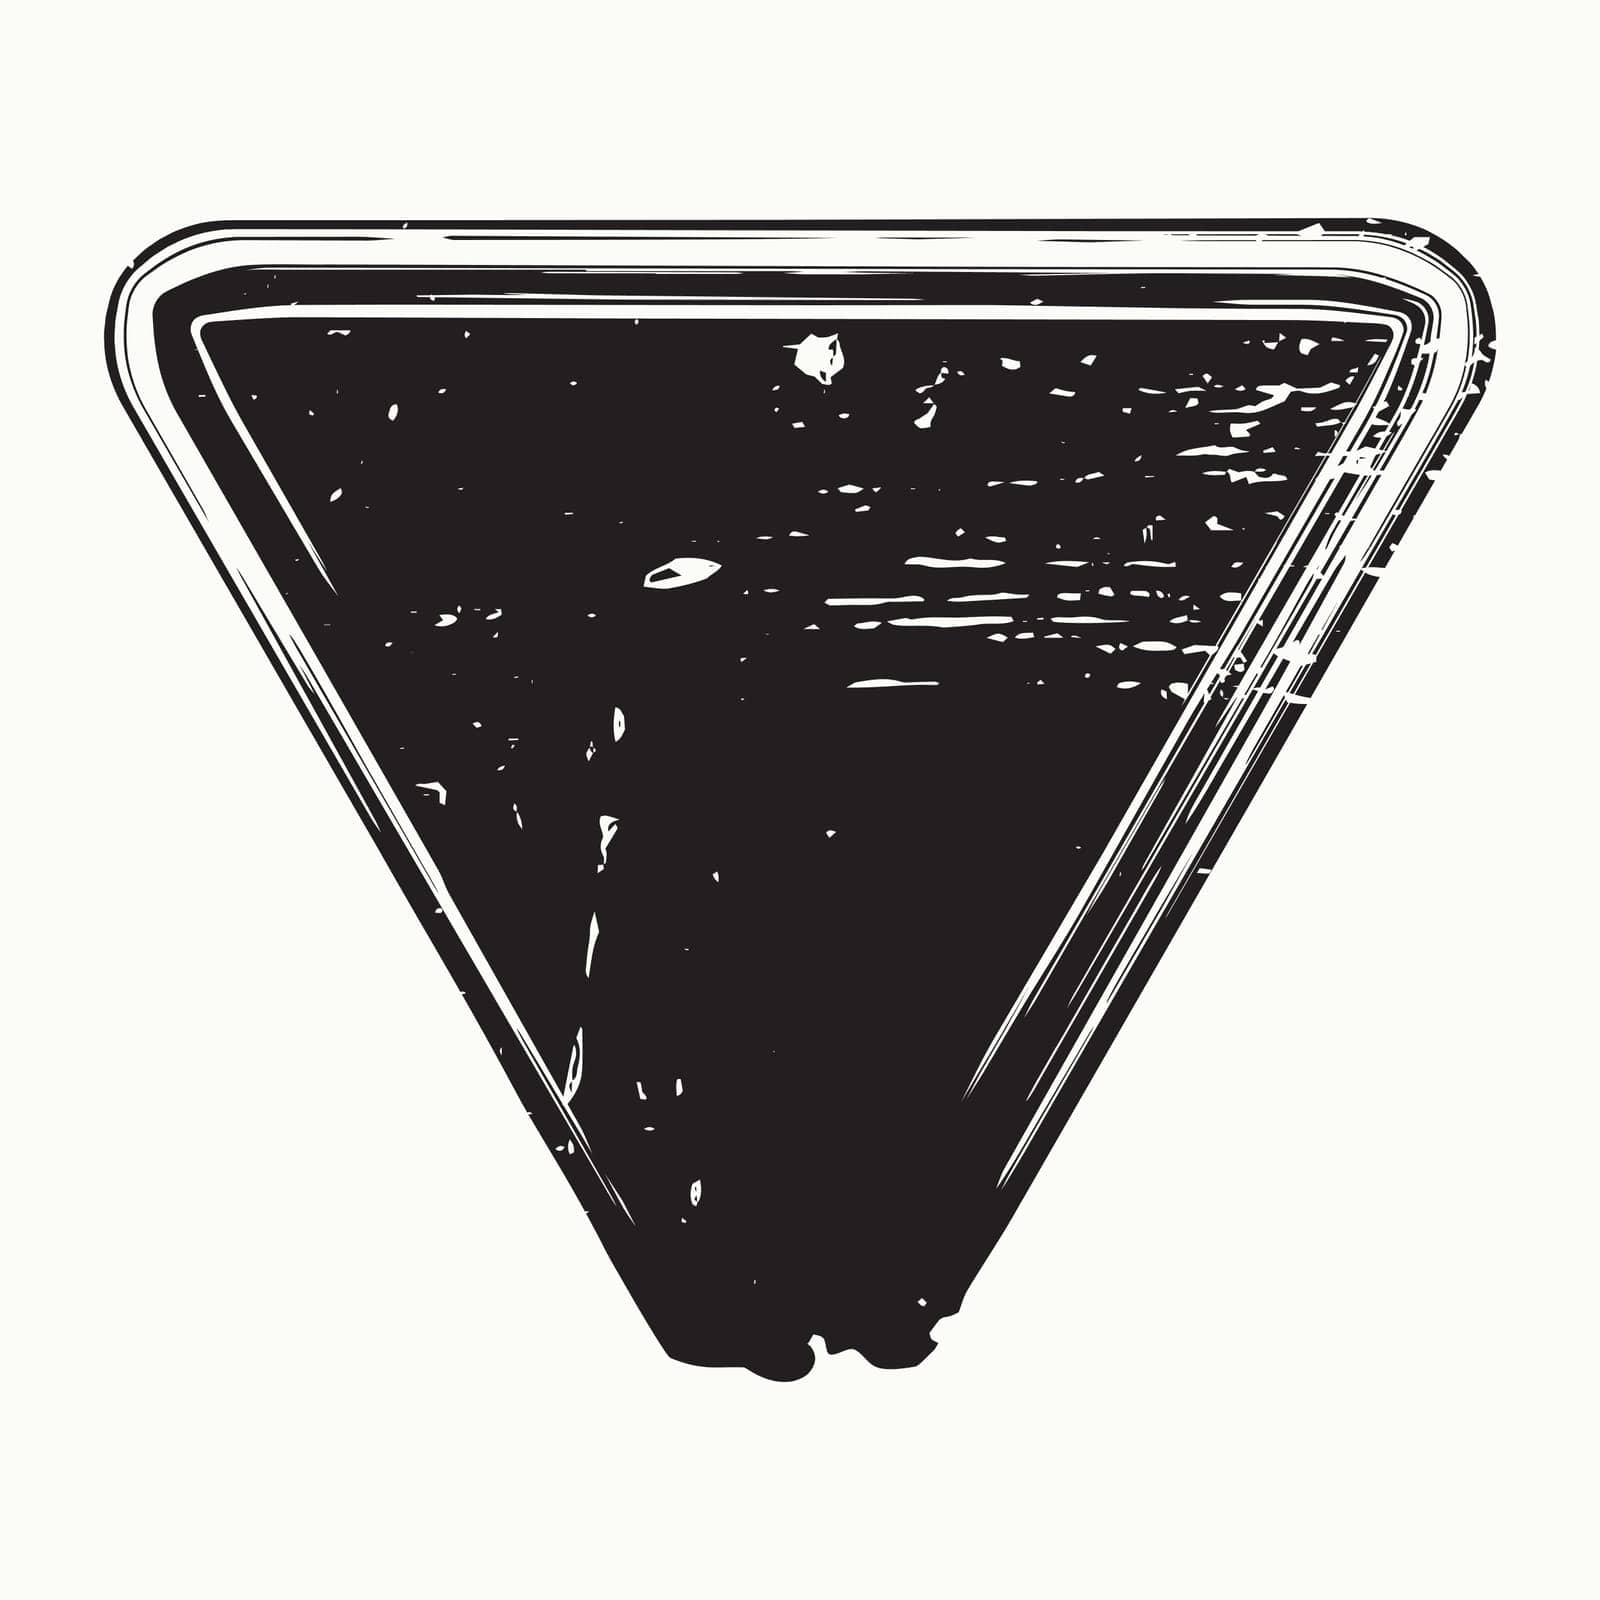 Isolated Grunge triangle shape overlay texture. Distress artistic template. EPS10 vetor.